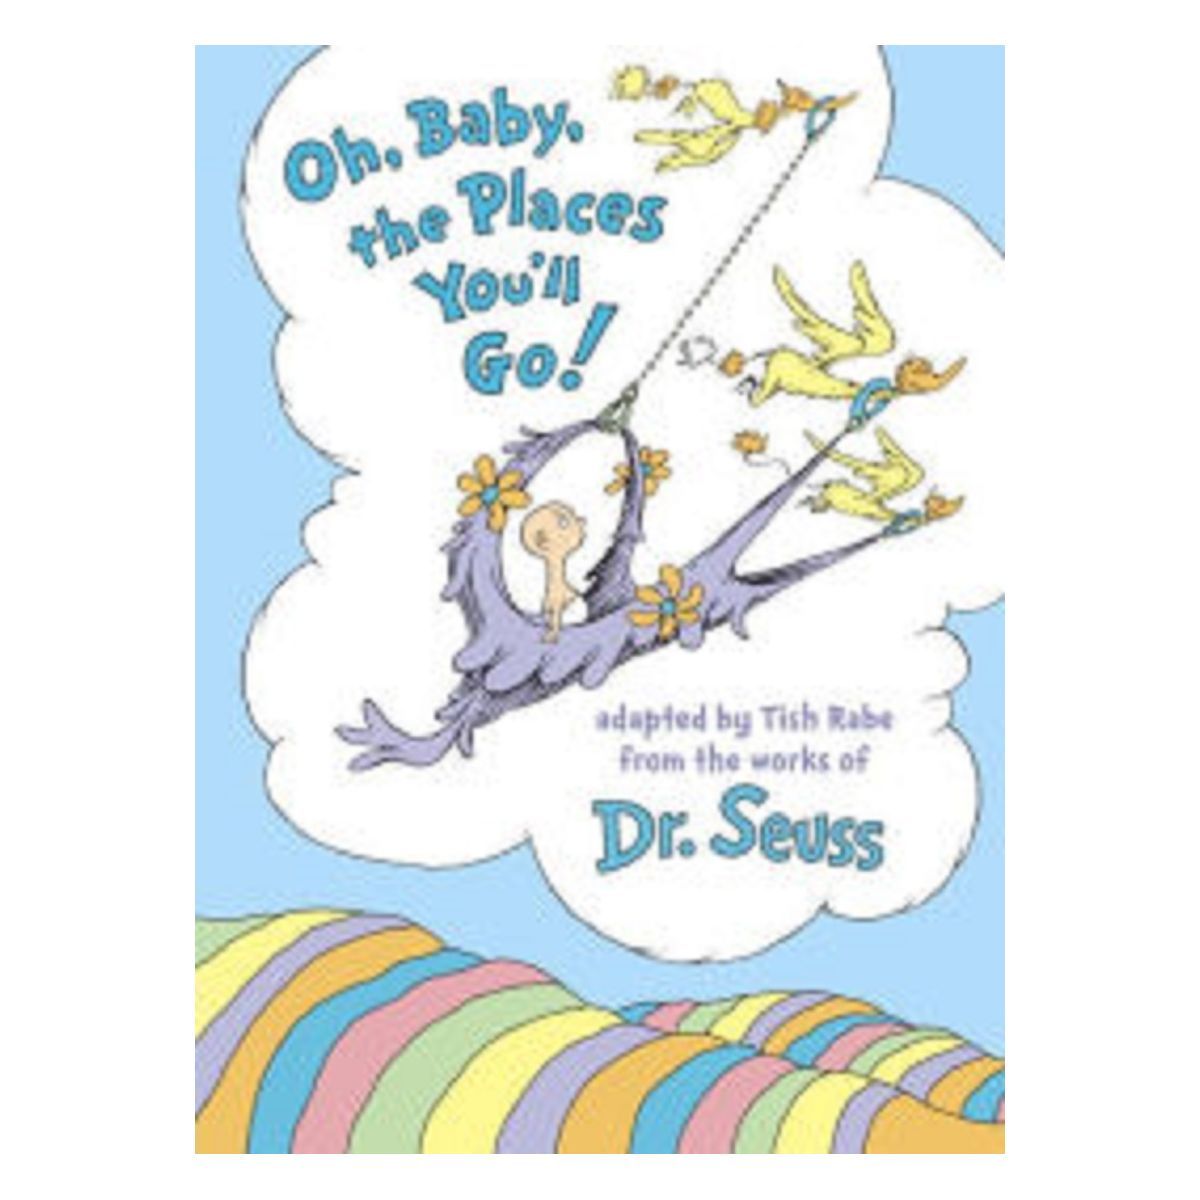 Oh, Baby, the Places You'll Go! by Tish Rabe and Dr. Seuss (Hardcover) by Tish Rabe | Target